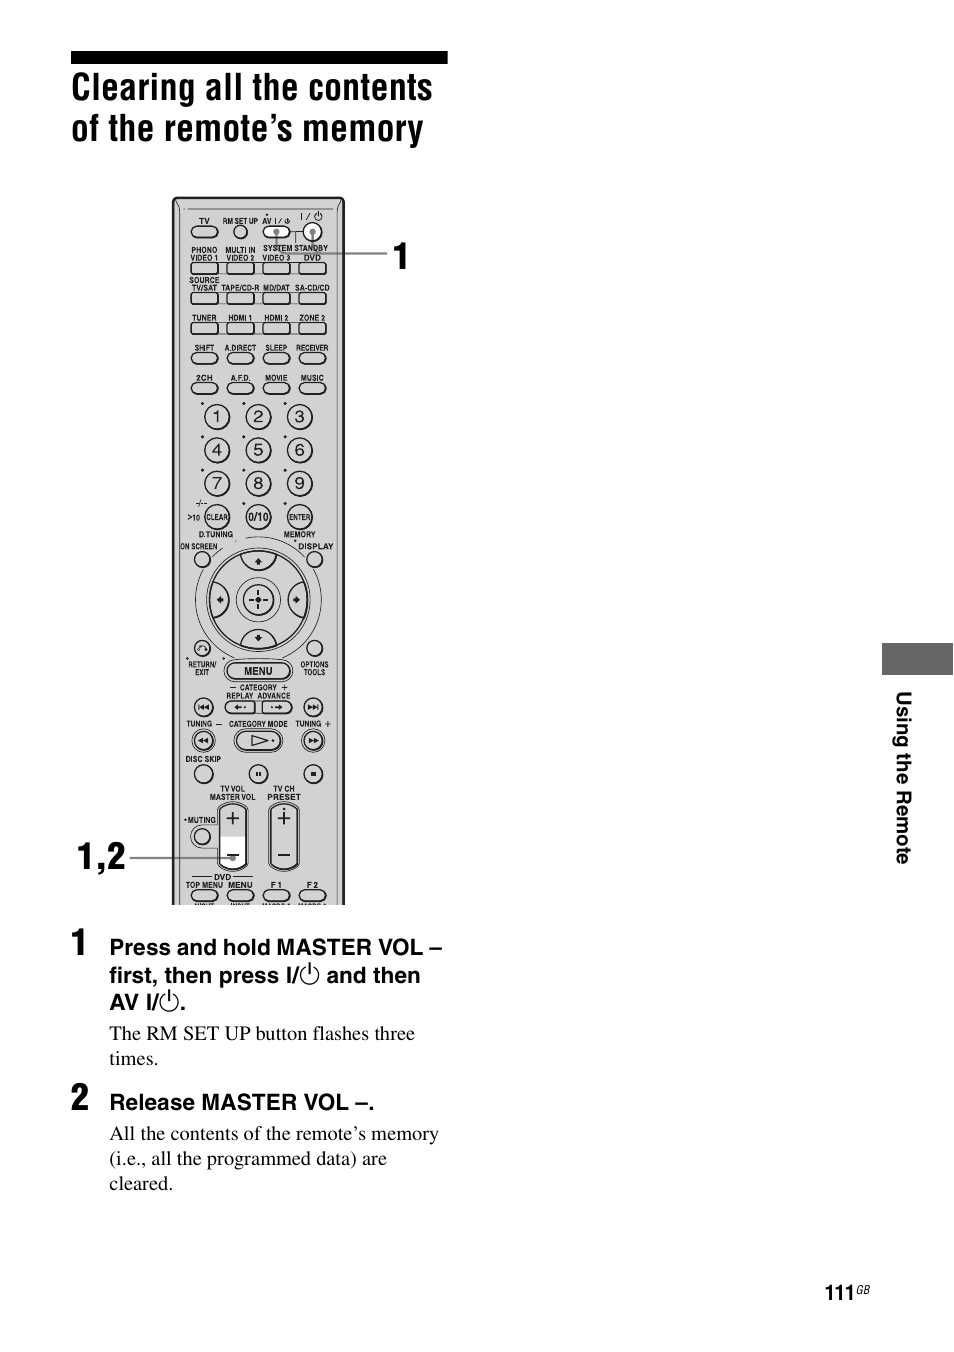 Clearing all the contents of the remote’s memory, Clearing all the contents of the remote’s, Memory | Sony STR-DG1000 User Manual | Page 111 / 123